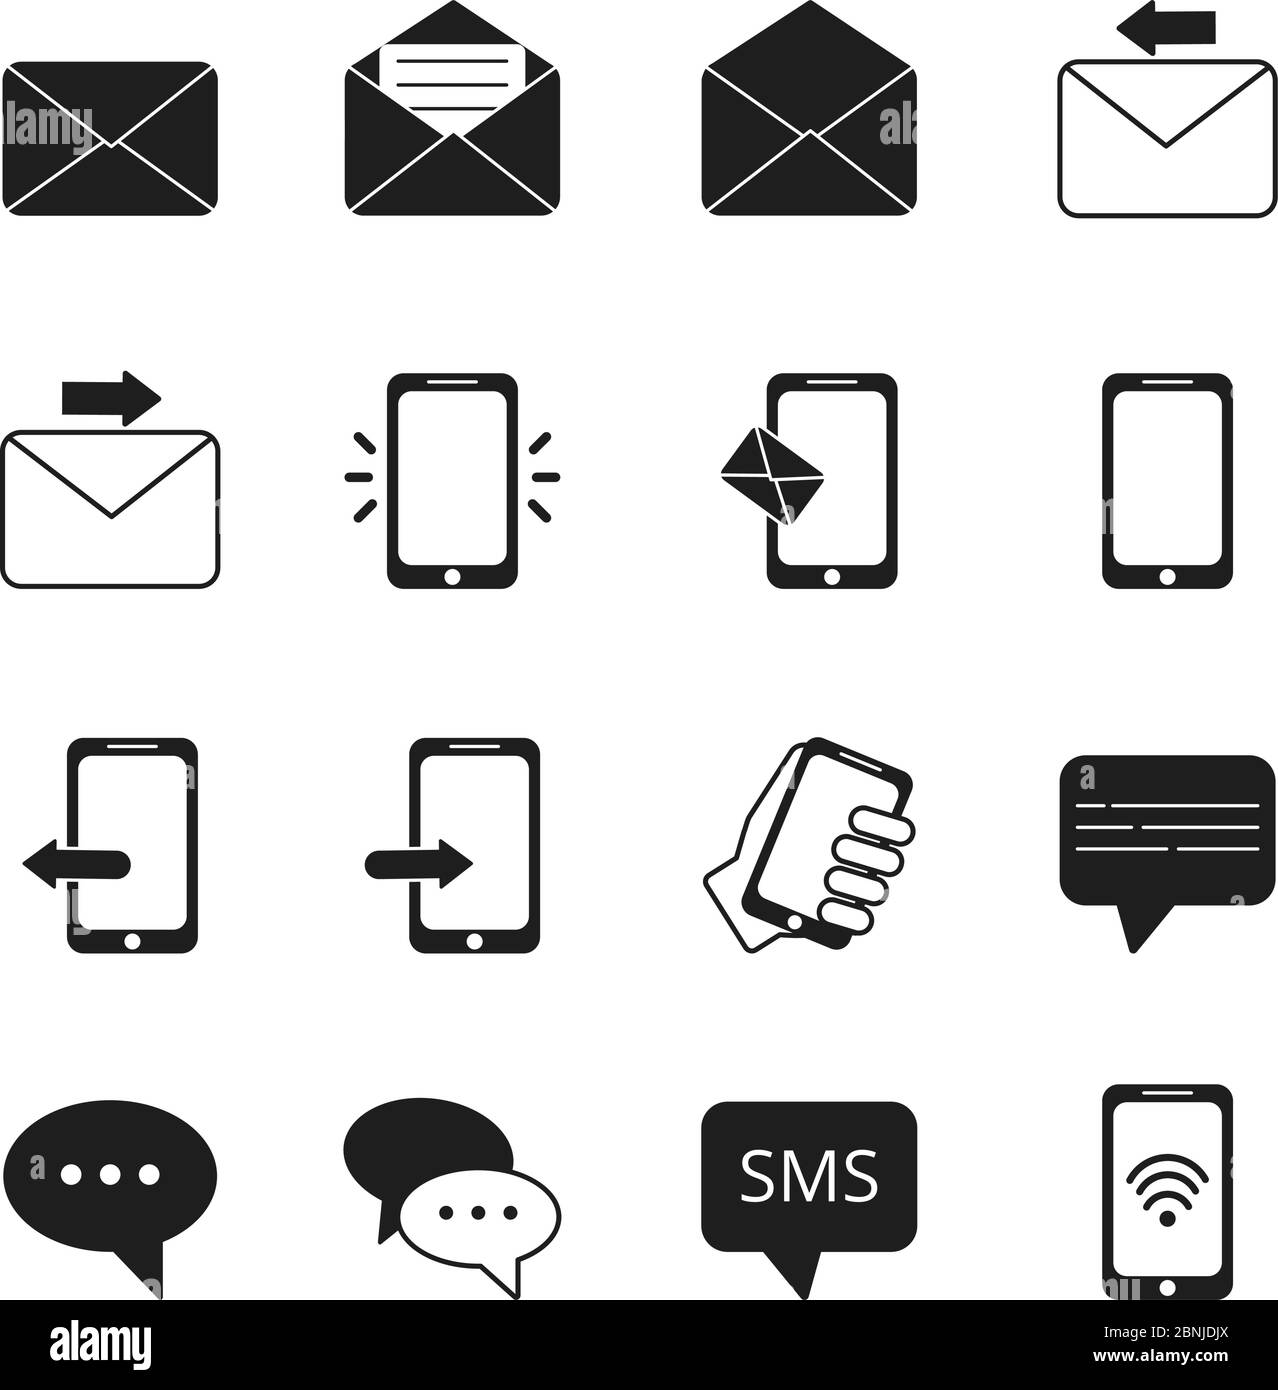 Business icon set of communication symbols. Phone, message bubbles, email signs Stock Vector